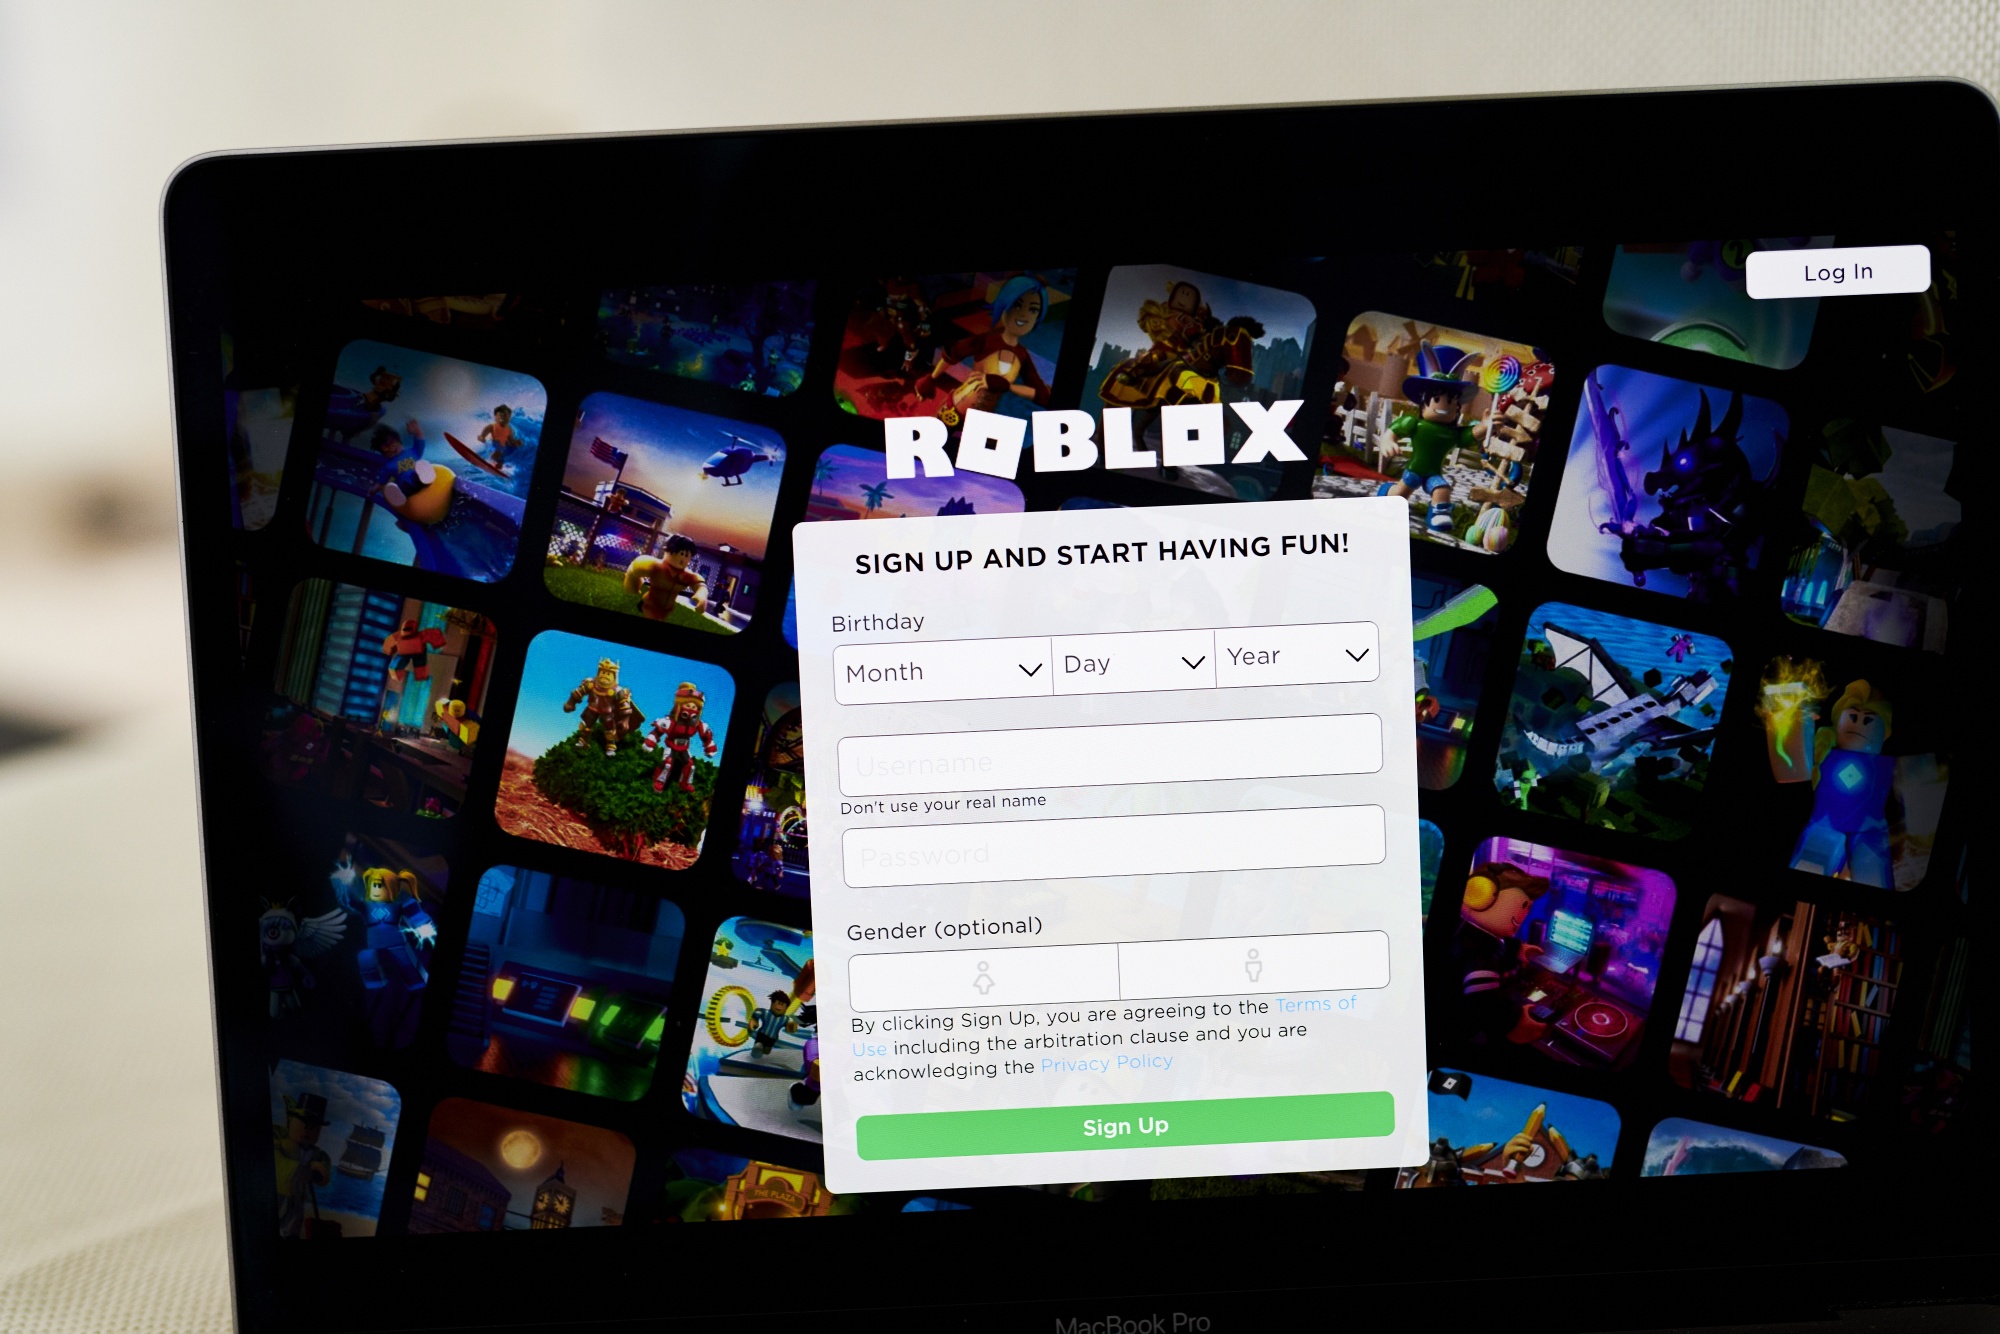 More than 50% of players in top Roblox games are in Private and